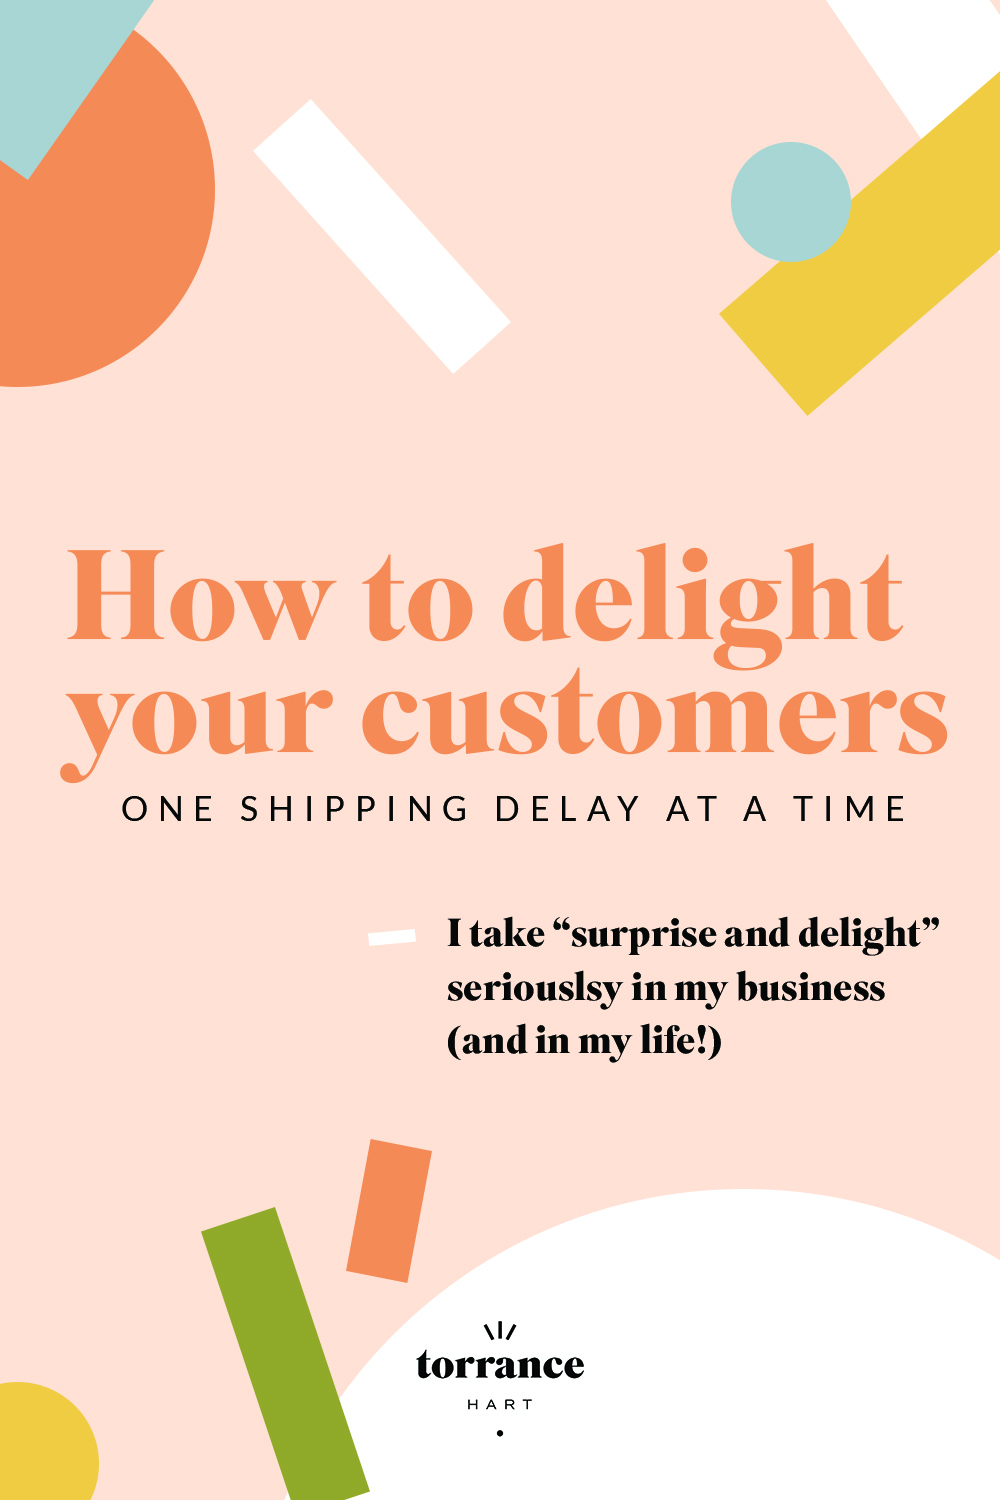 How to delight your customers